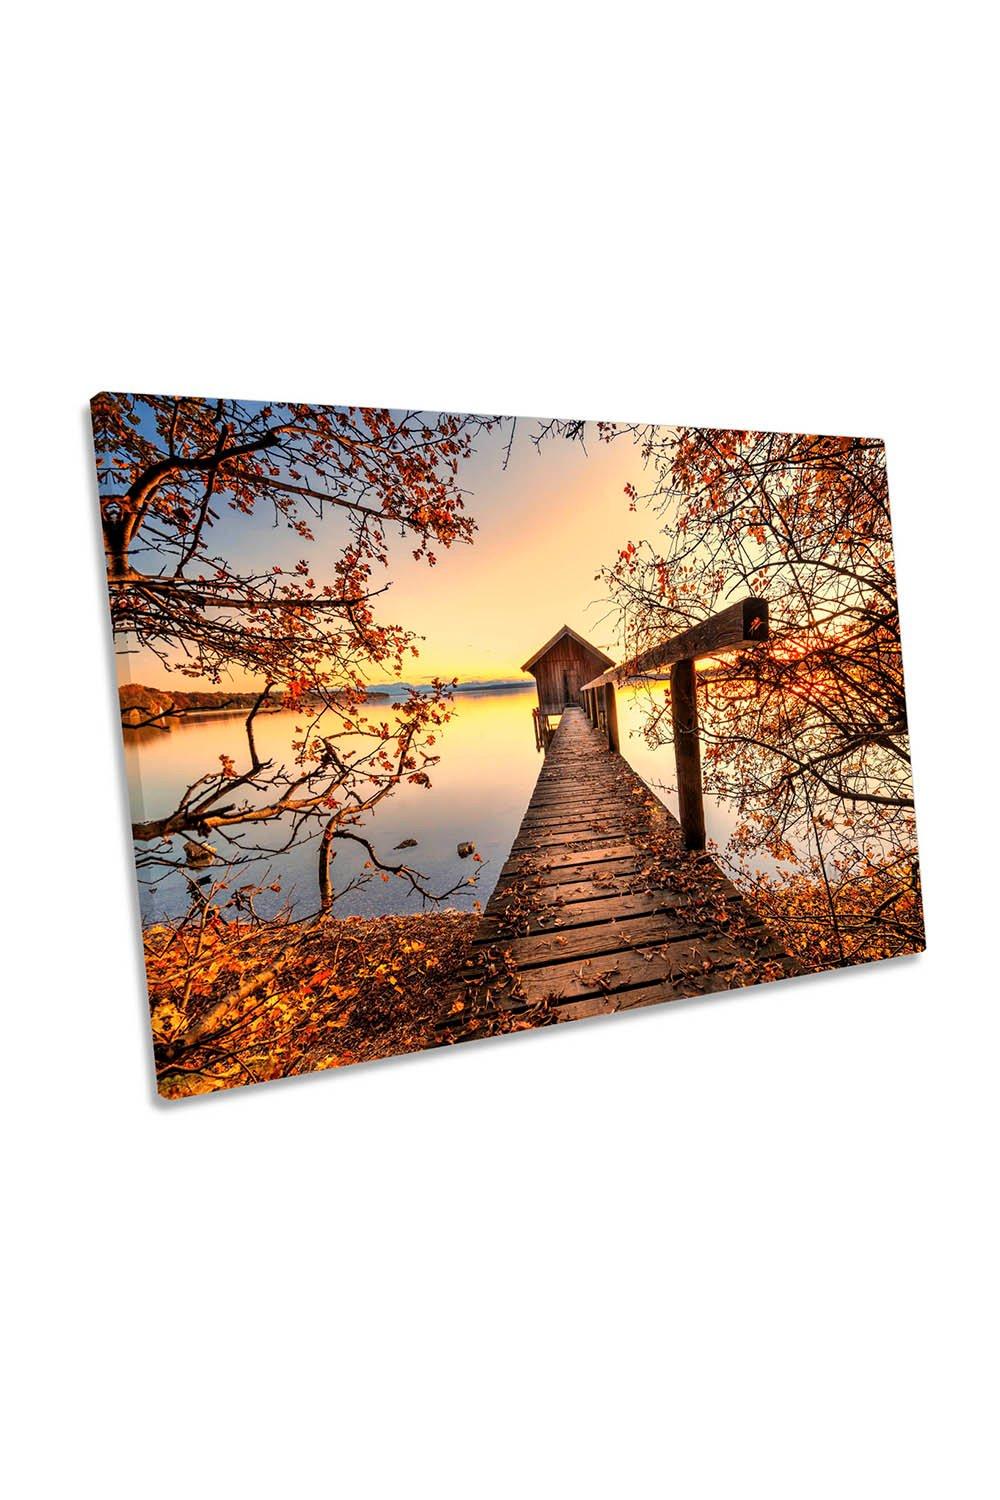 Autumn at the Lake Pier Calm Boathouse Canvas Wall Art Picture Print